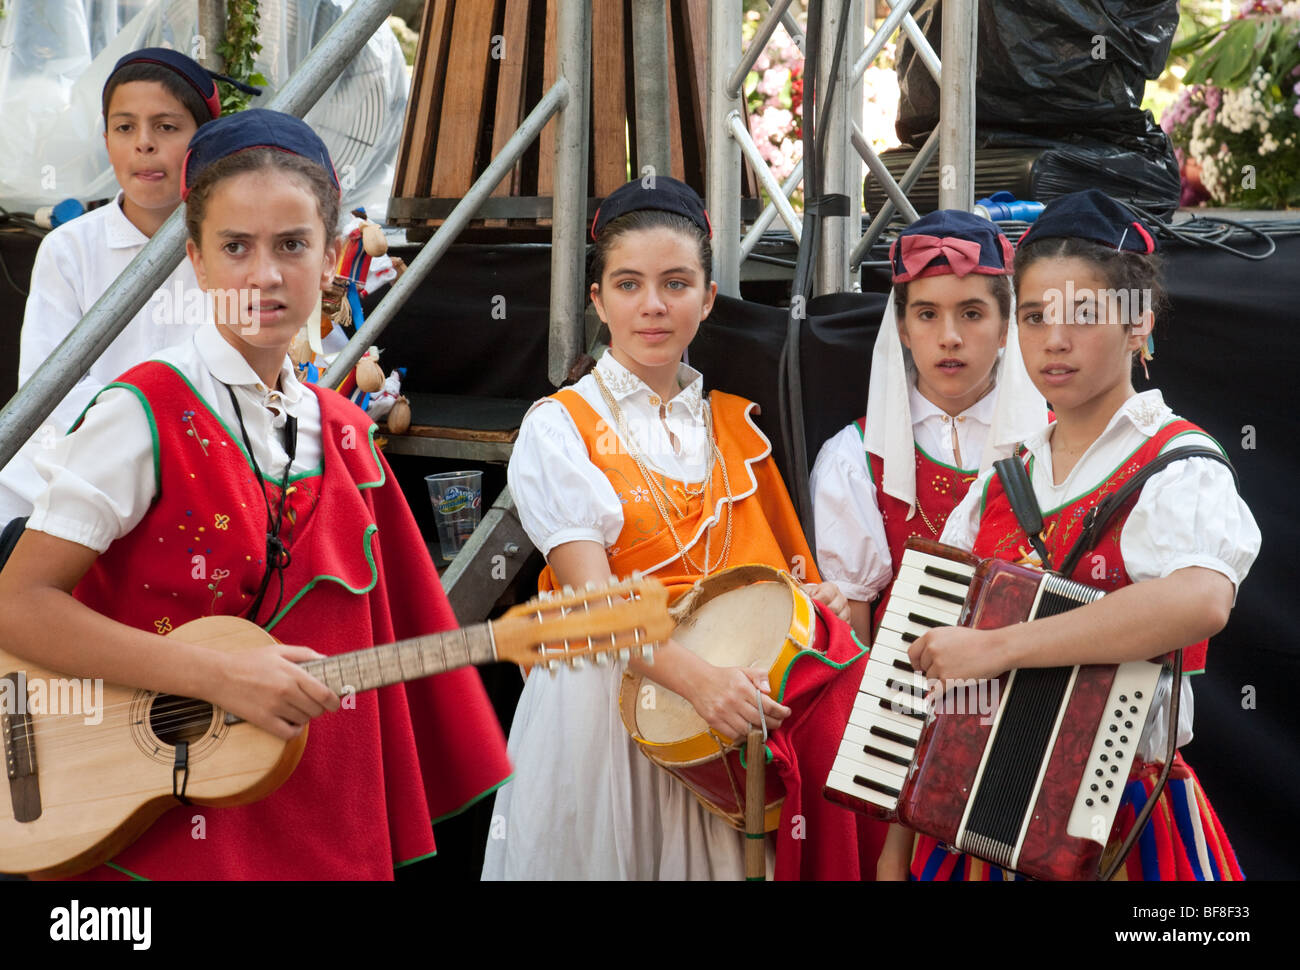 Madeiran children in traditional costume playing musical instruments and dancing, Funchal, madeira Stock Photo